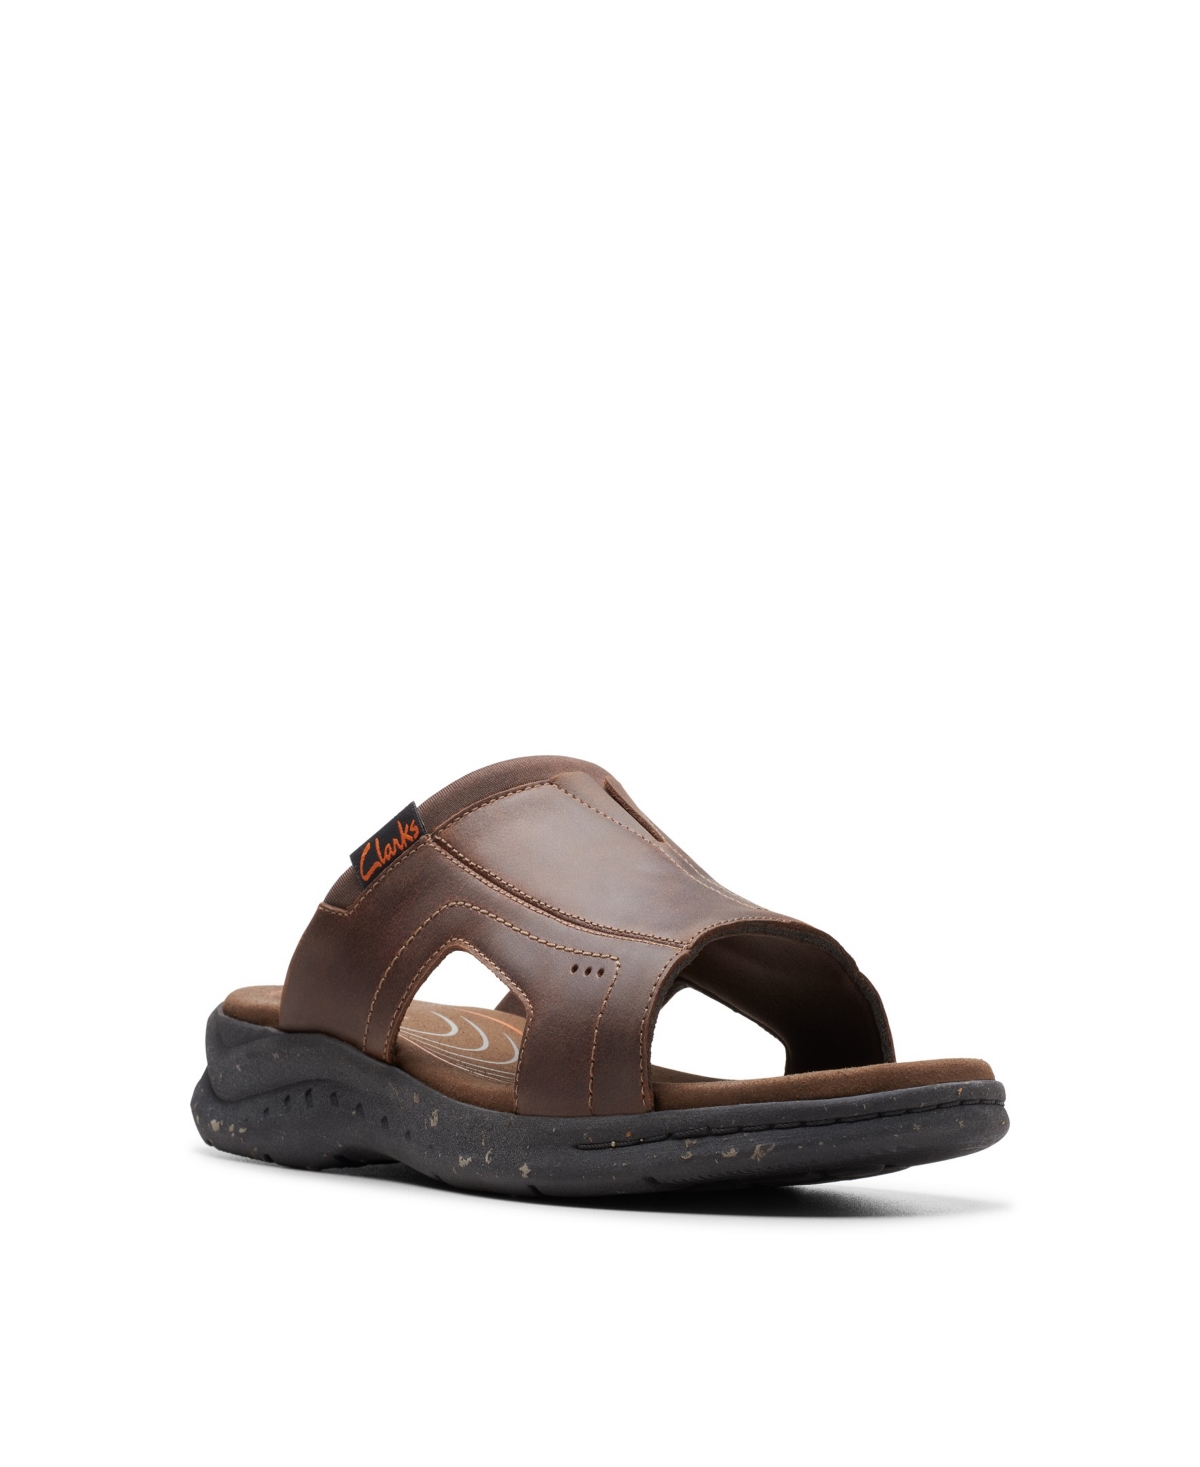 Clarks Collection Men's Walkford Band Sandals In Beeswax Leather